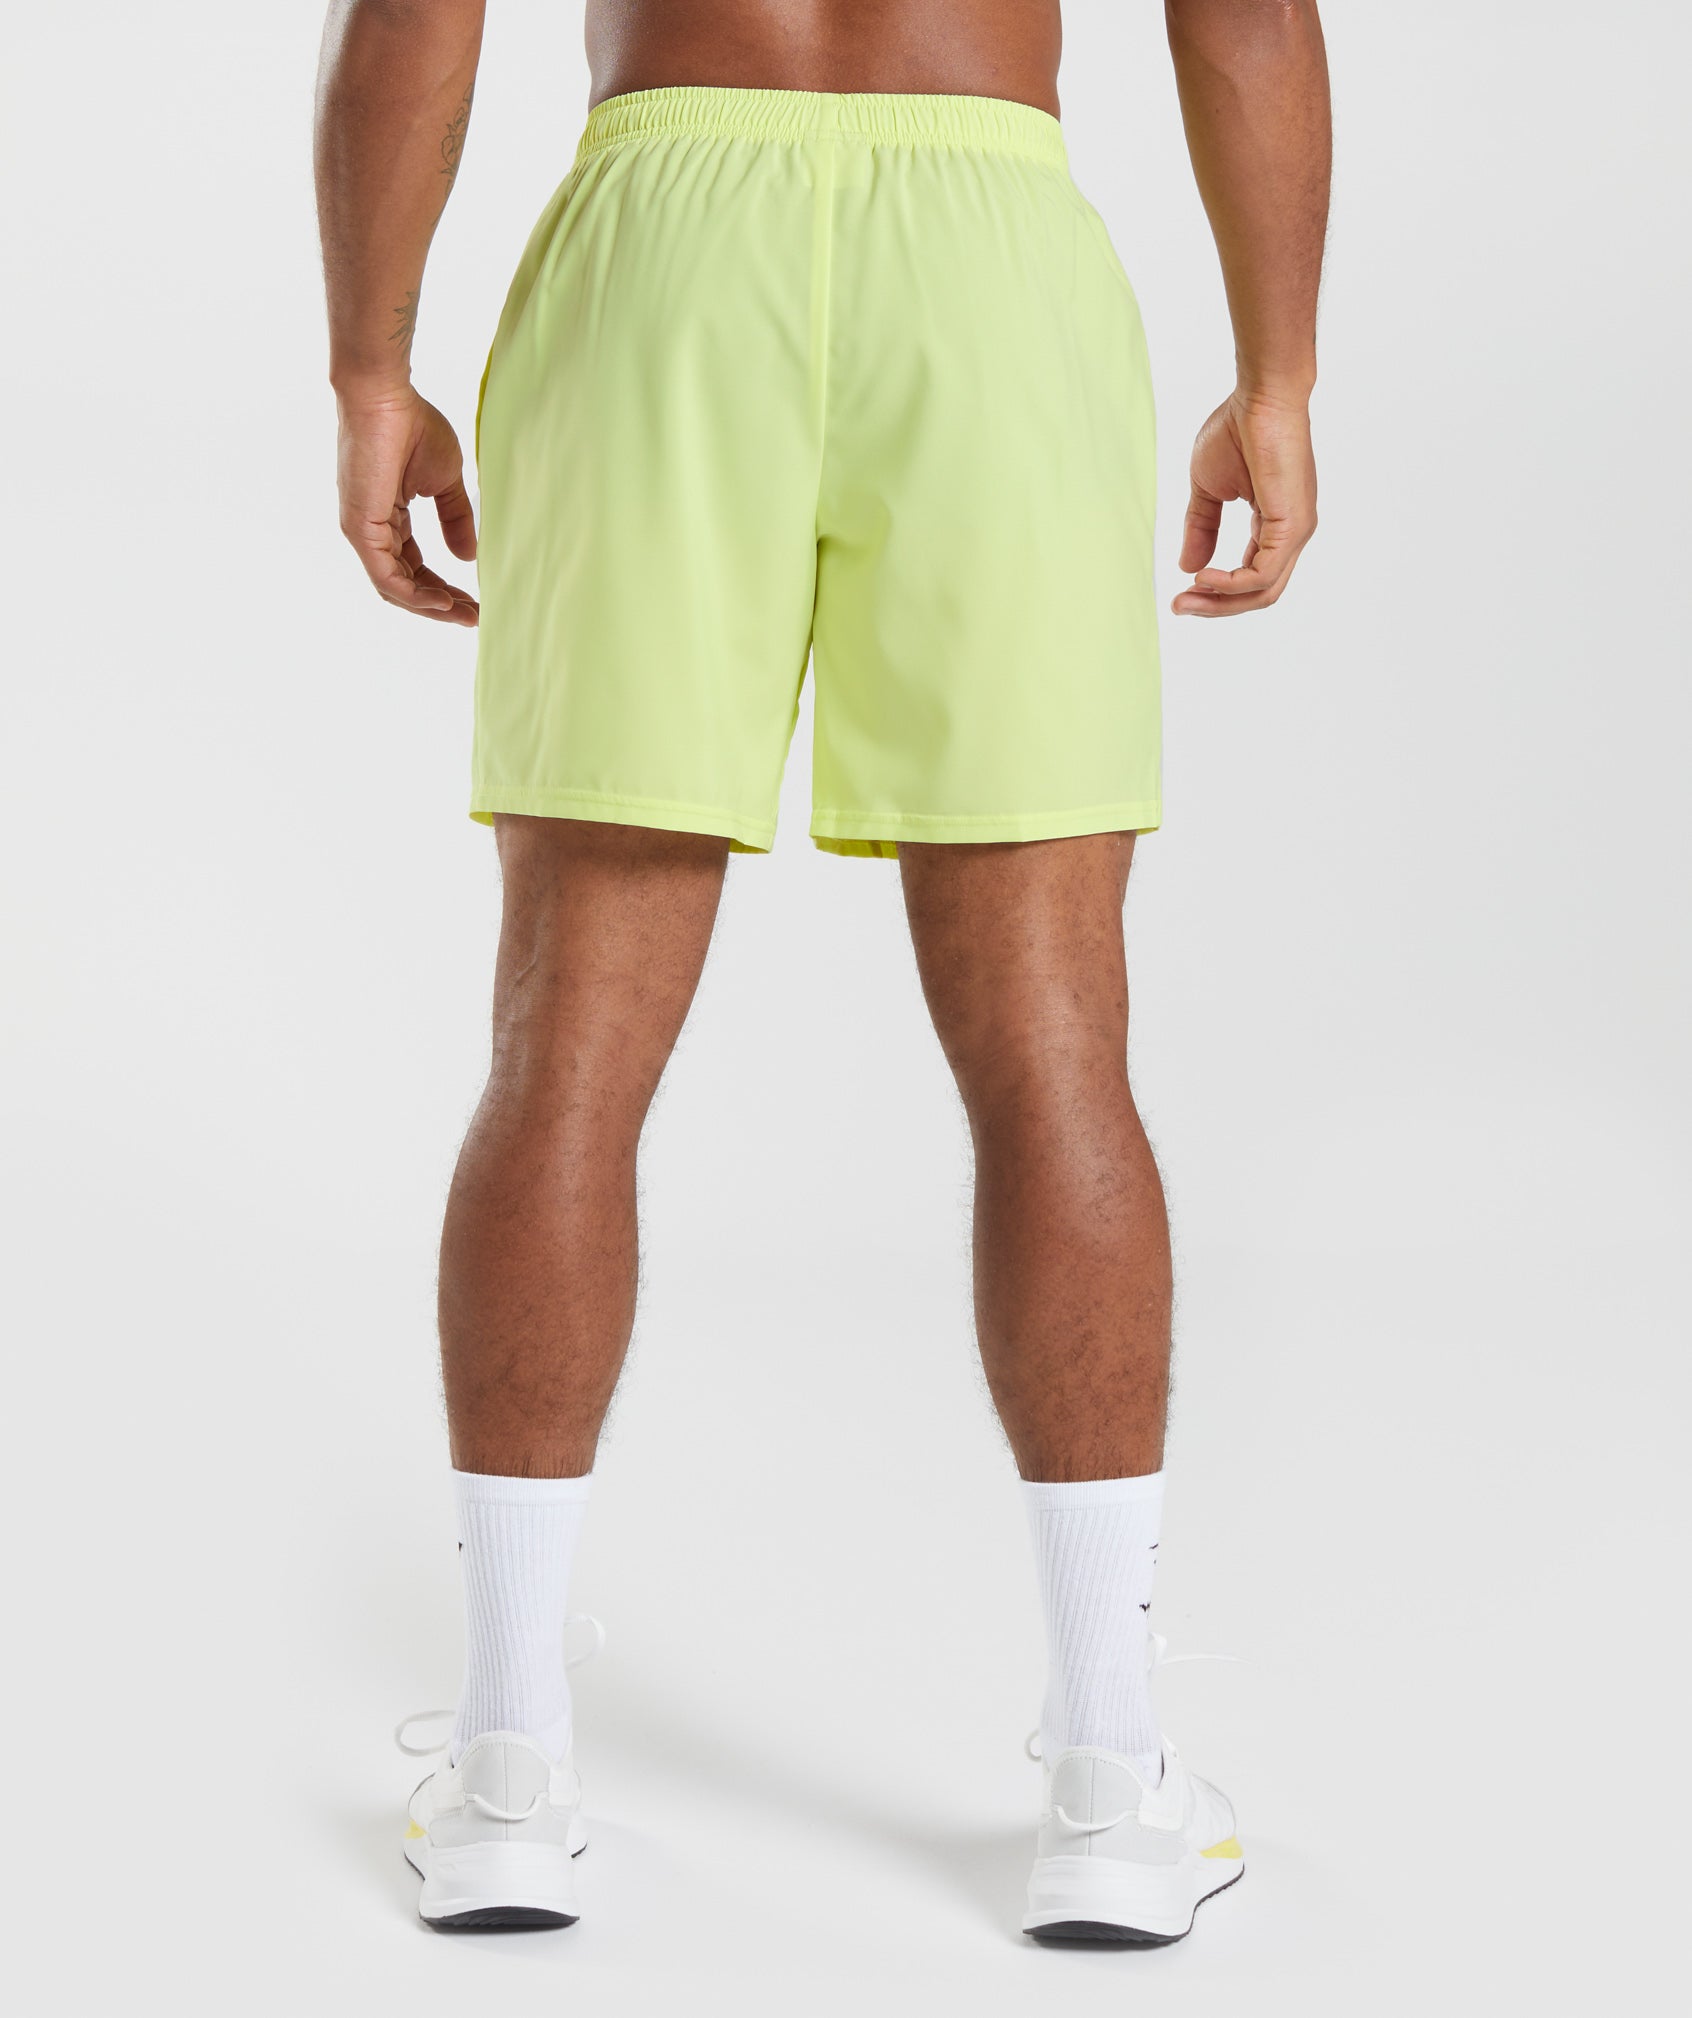 Arrival 7" Shorts in Firefly Green - view 2